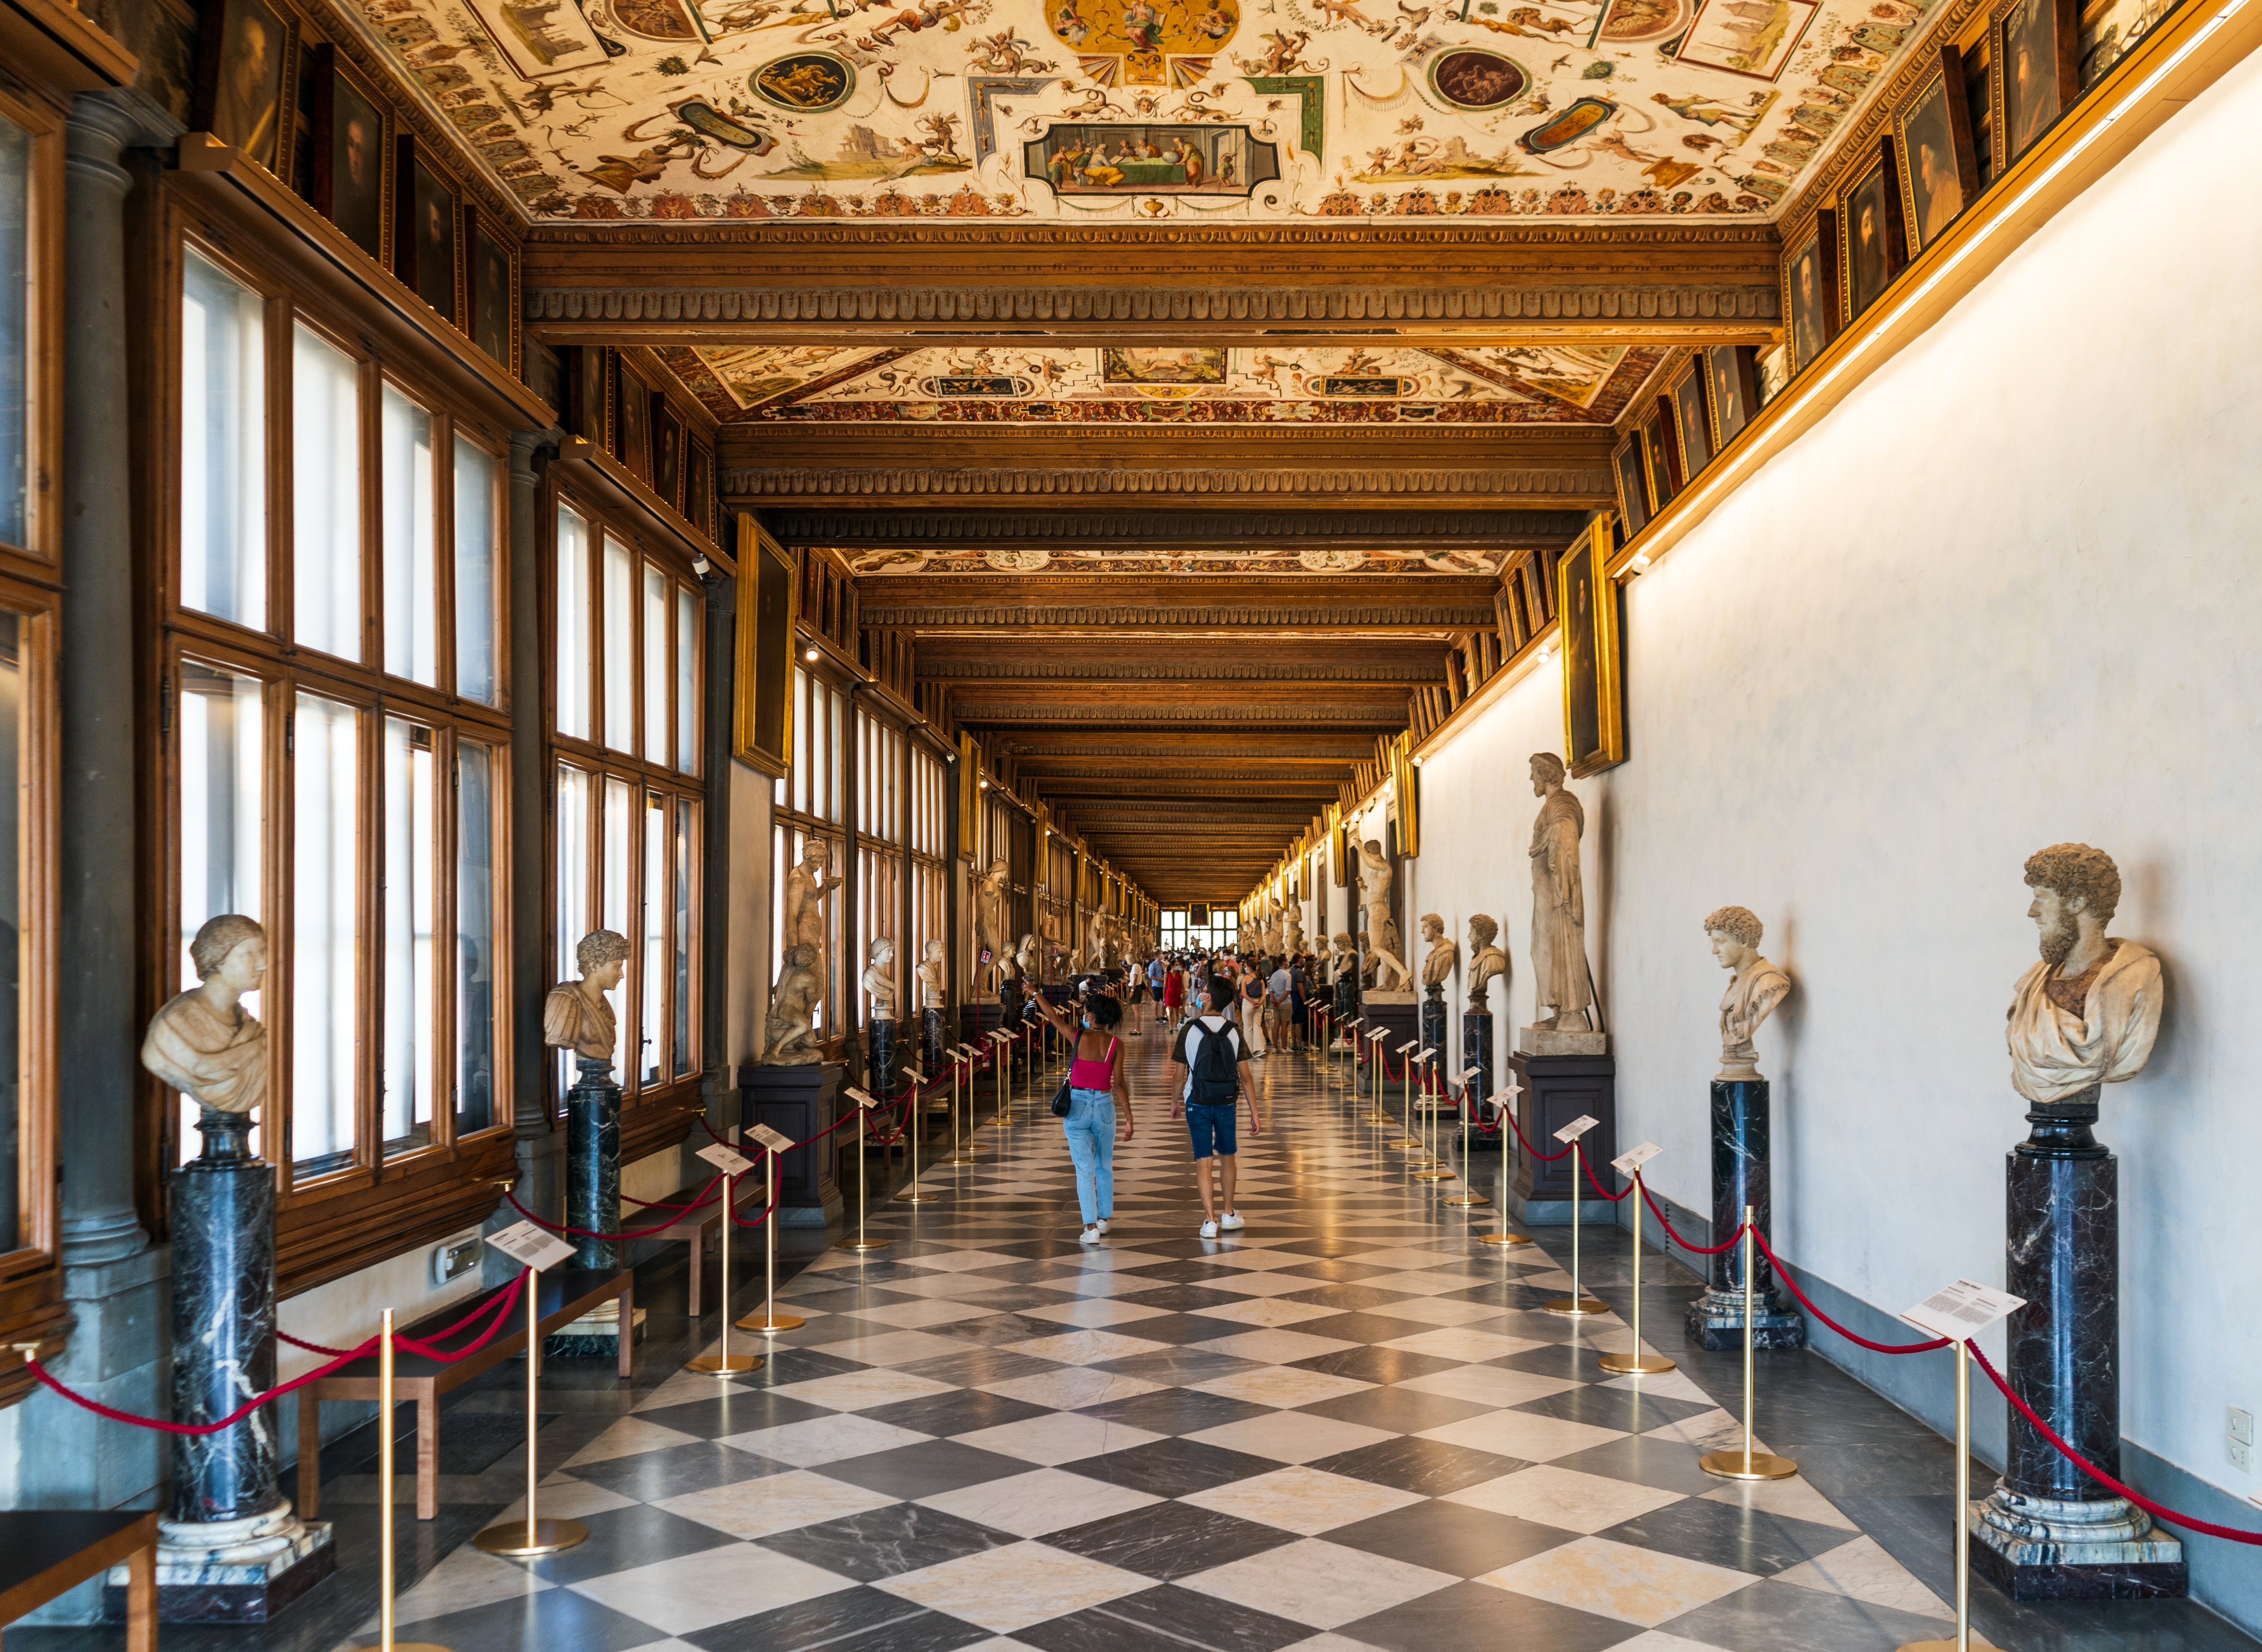 Uffizi Gallery, with statues and tourists, Firenze city center, Tuscany region, Italy